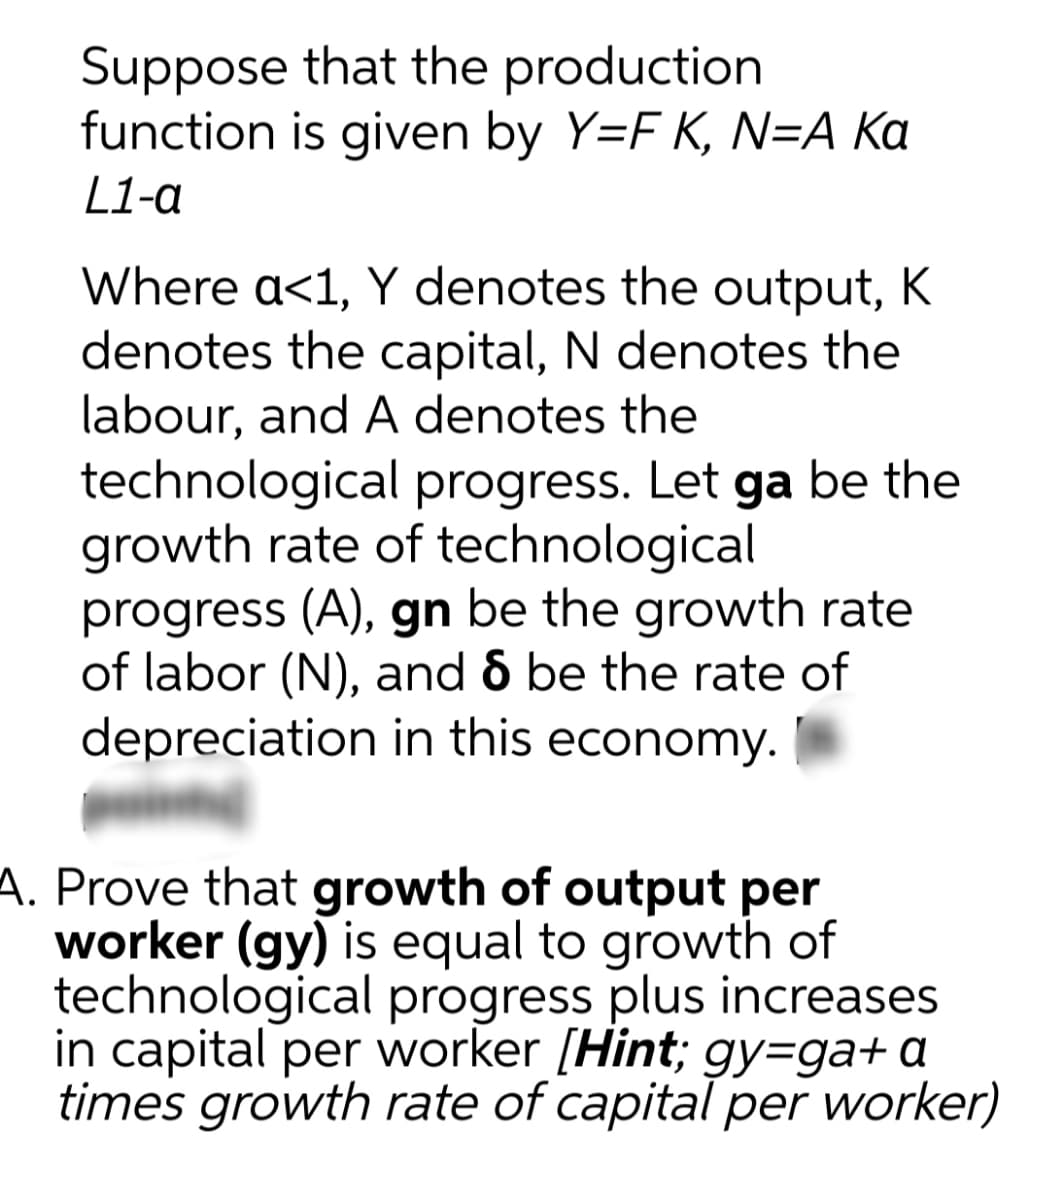 Suppose that the production
function is given by Y=F K, N=A Ka
L1-a
Where a<1, Y denotes the output, K
denotes the capital, N denotes the
labour, and A denotes the
technological progress. Let ga be the
growth rate of technological
progress (A), gn be the growth rate
of labor (N), and 6 be the rate of
depreciation in this economy.
A. Prove that growth of output per
worker (gy) is equal to growth of
technological progress plus increases
in capital per worker [Hint; gy=ga+ a
times growth rate of capital per worker)
